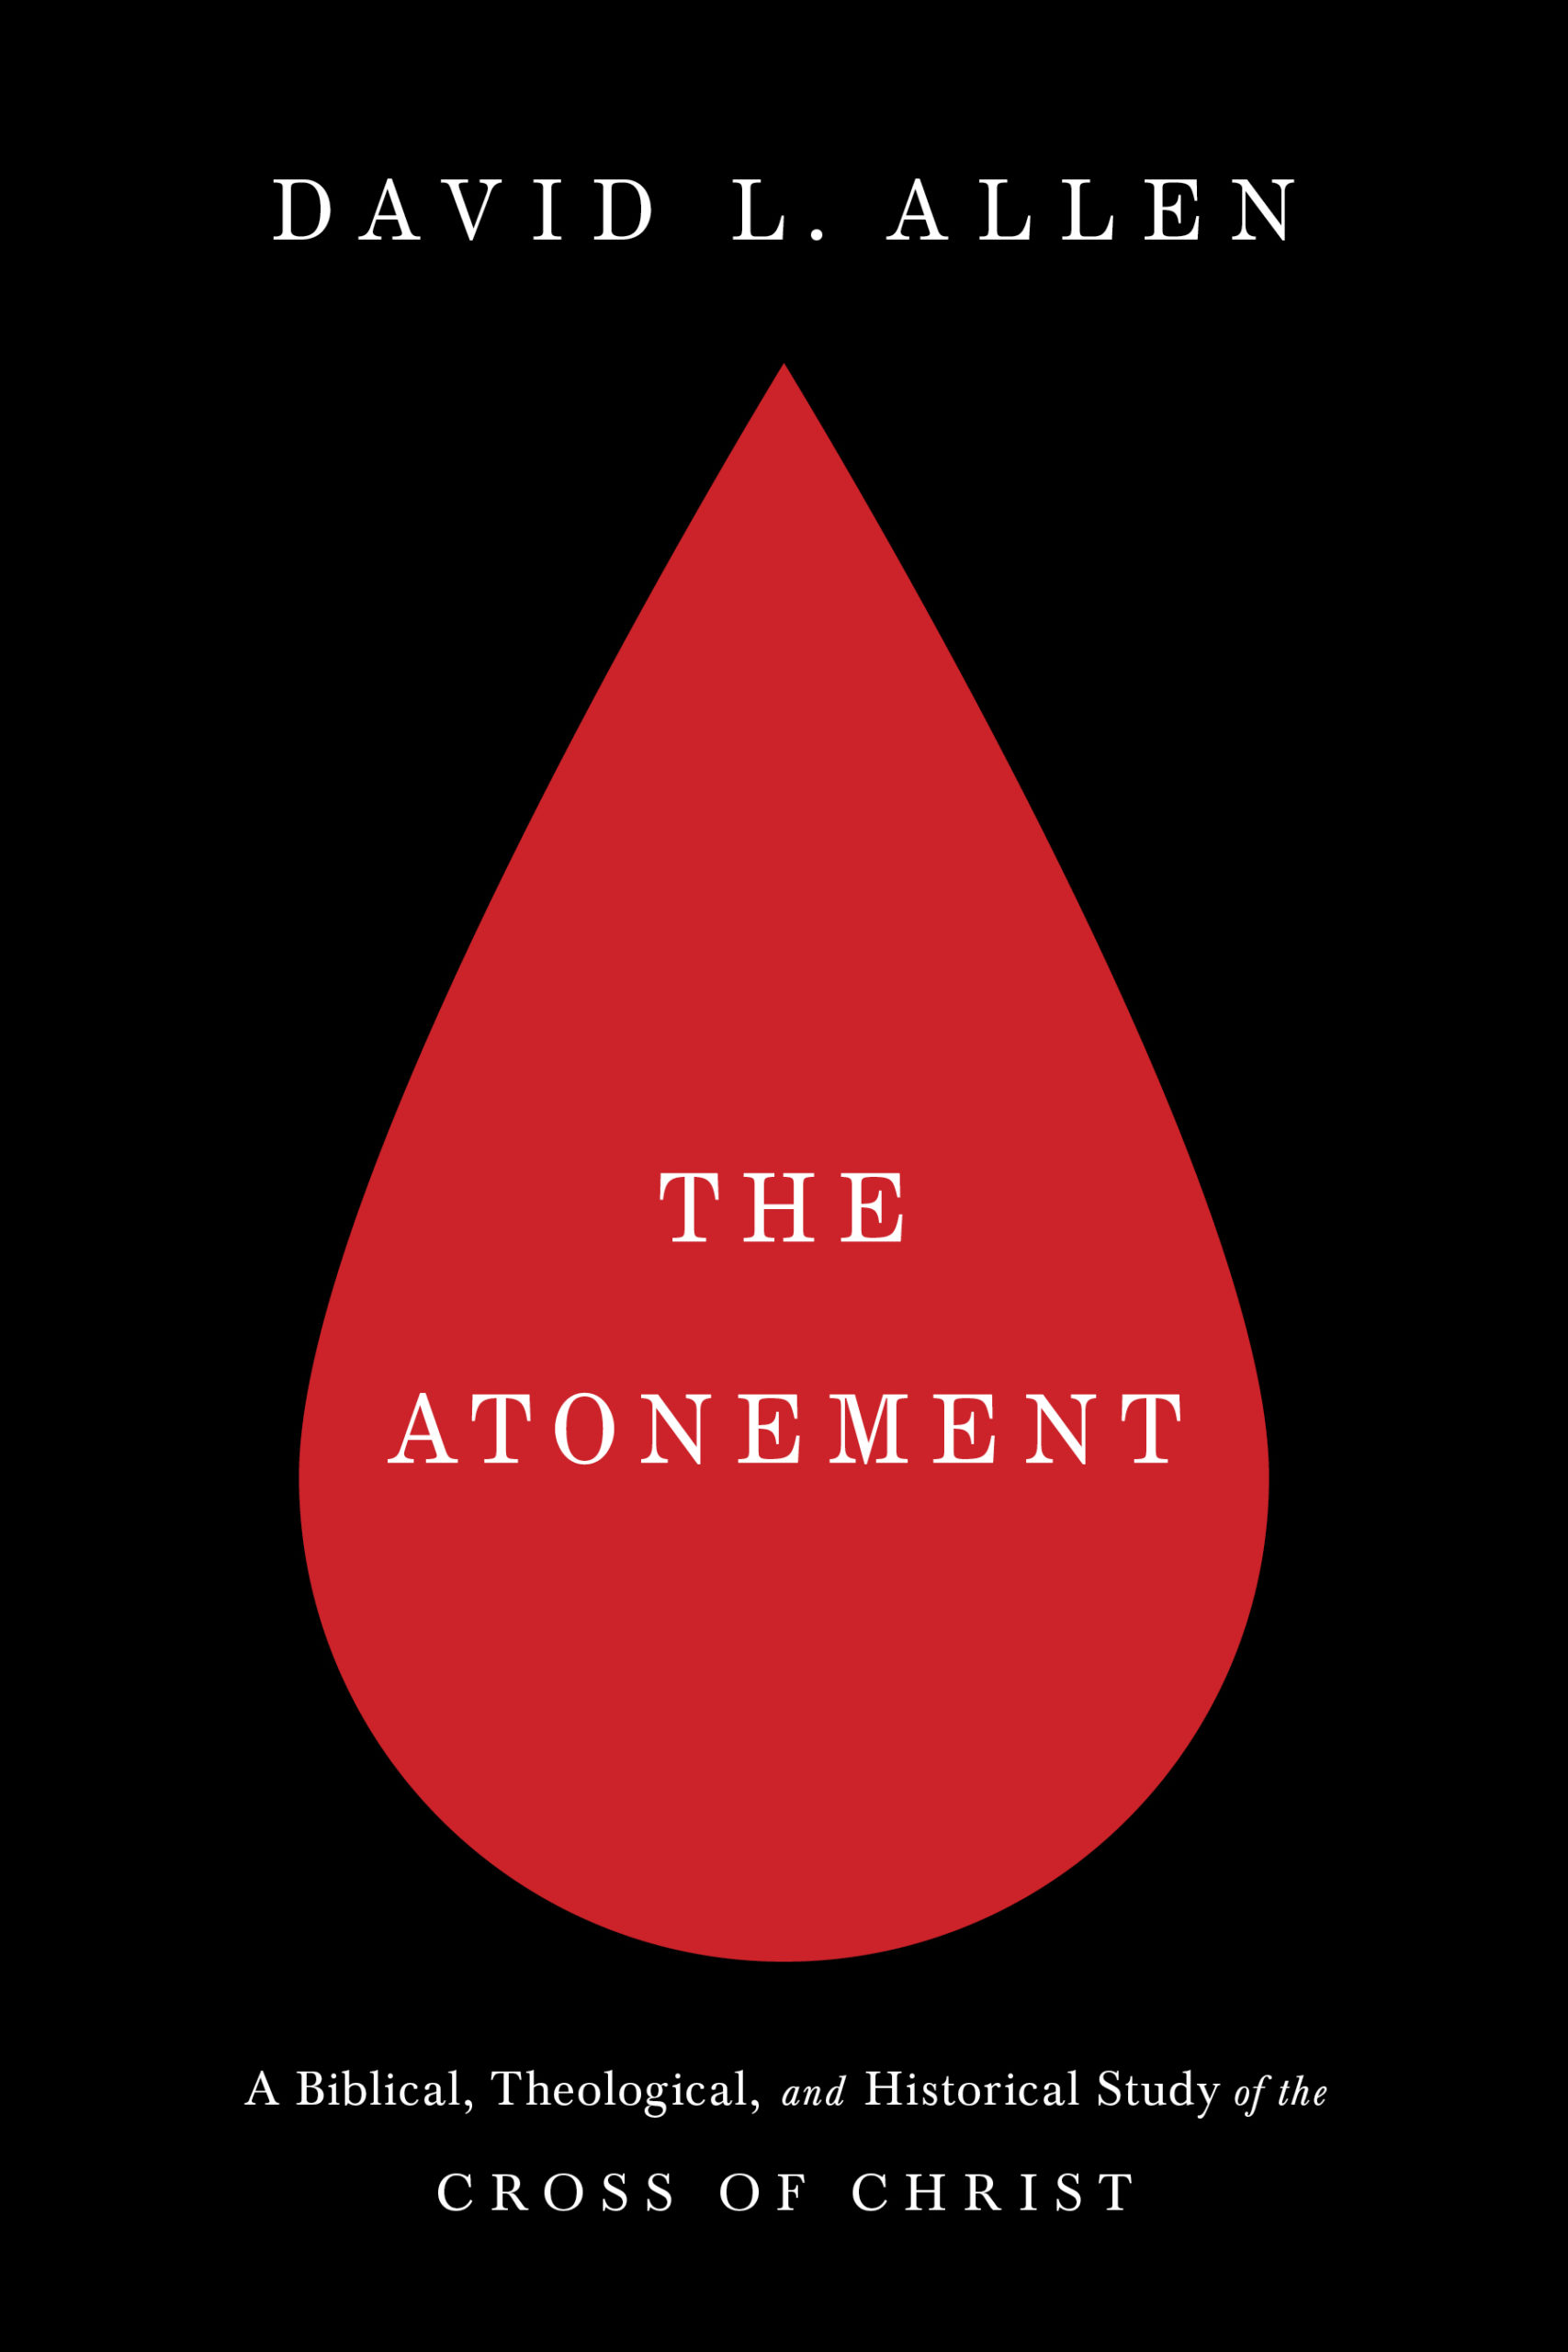 atonement book review new yorker